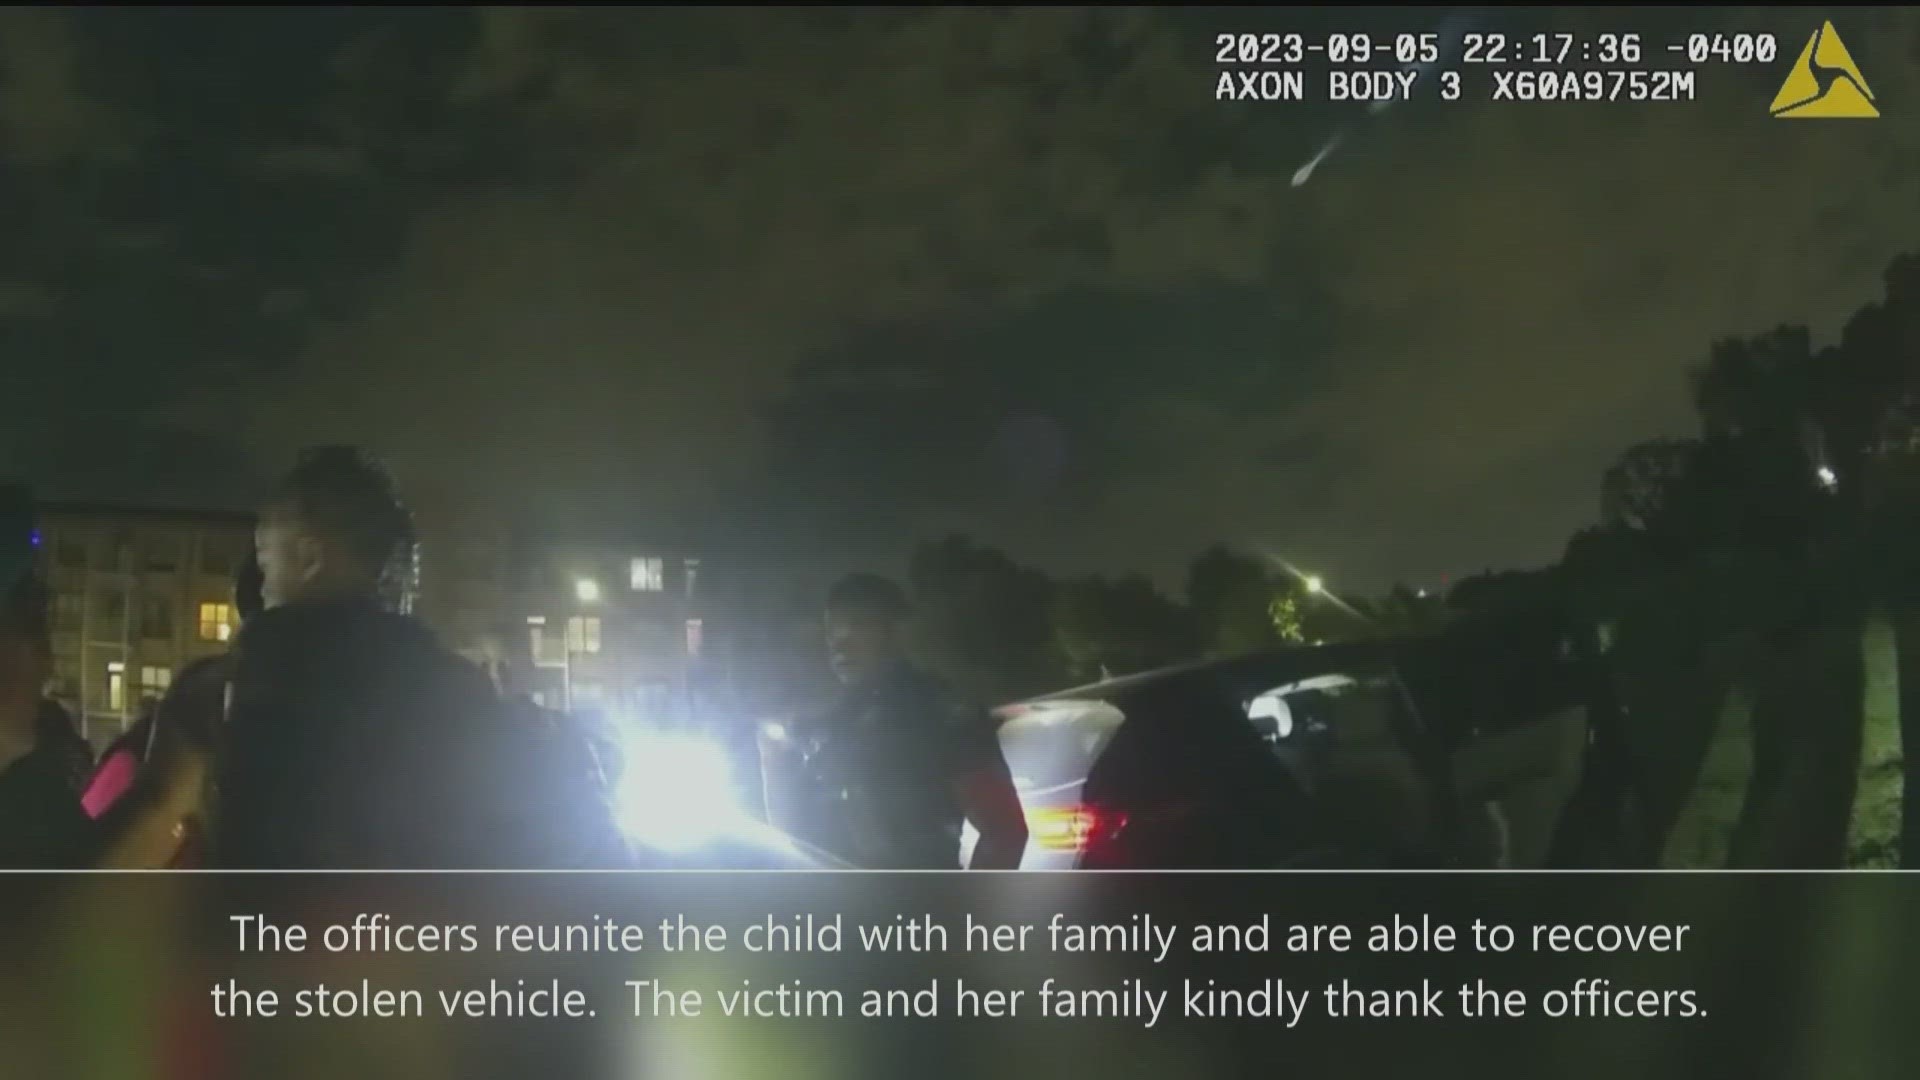 Bodycam video shows the moment a mother was reunited with her young child after police said her car was carjacked with her child inside.